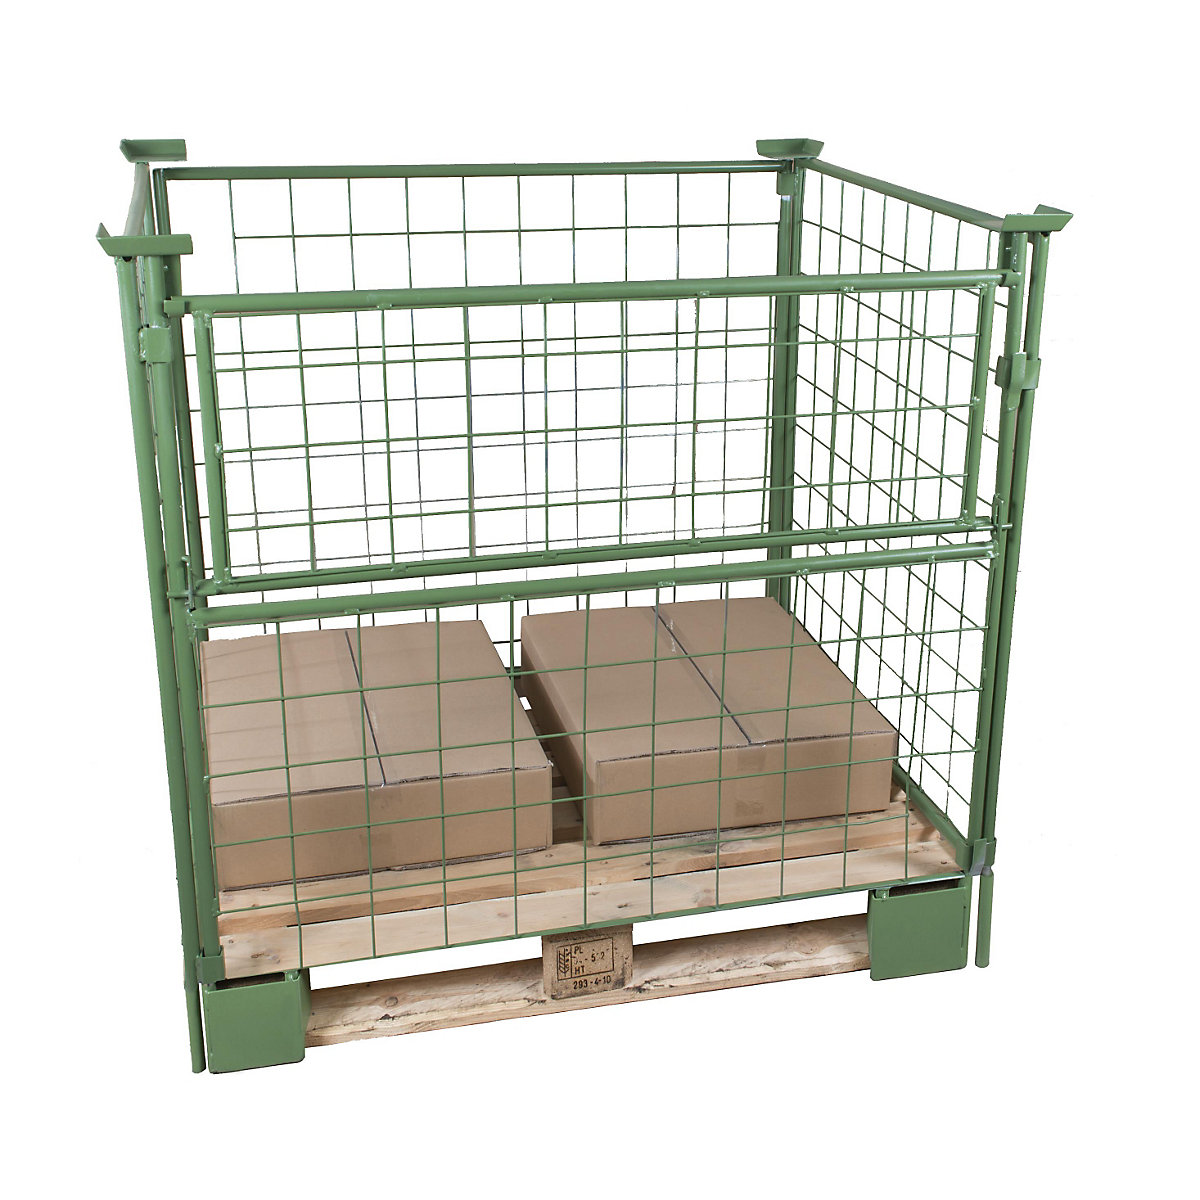 Pallet frame, effective height 1000 mm, for stacking, WxL 800 x 1200 mm, 1 long side can be half folded-1